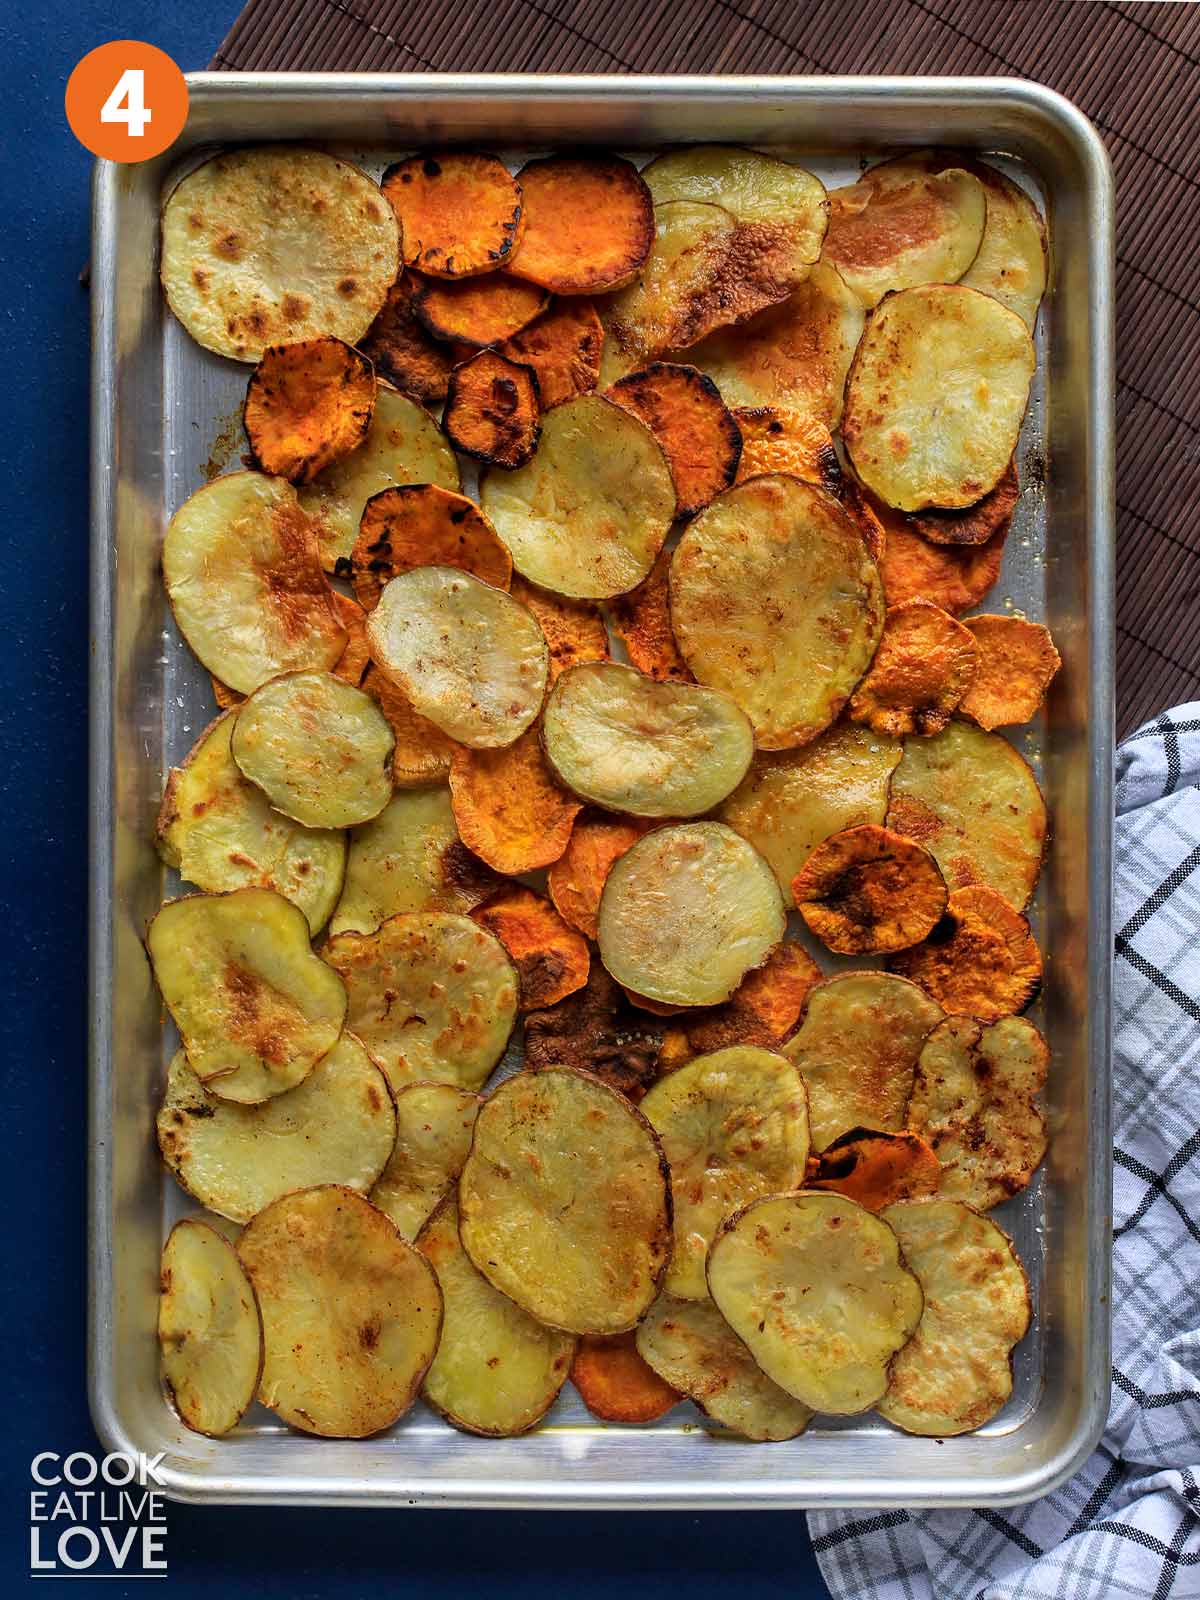 Cooked potatoes on a baking sheet.